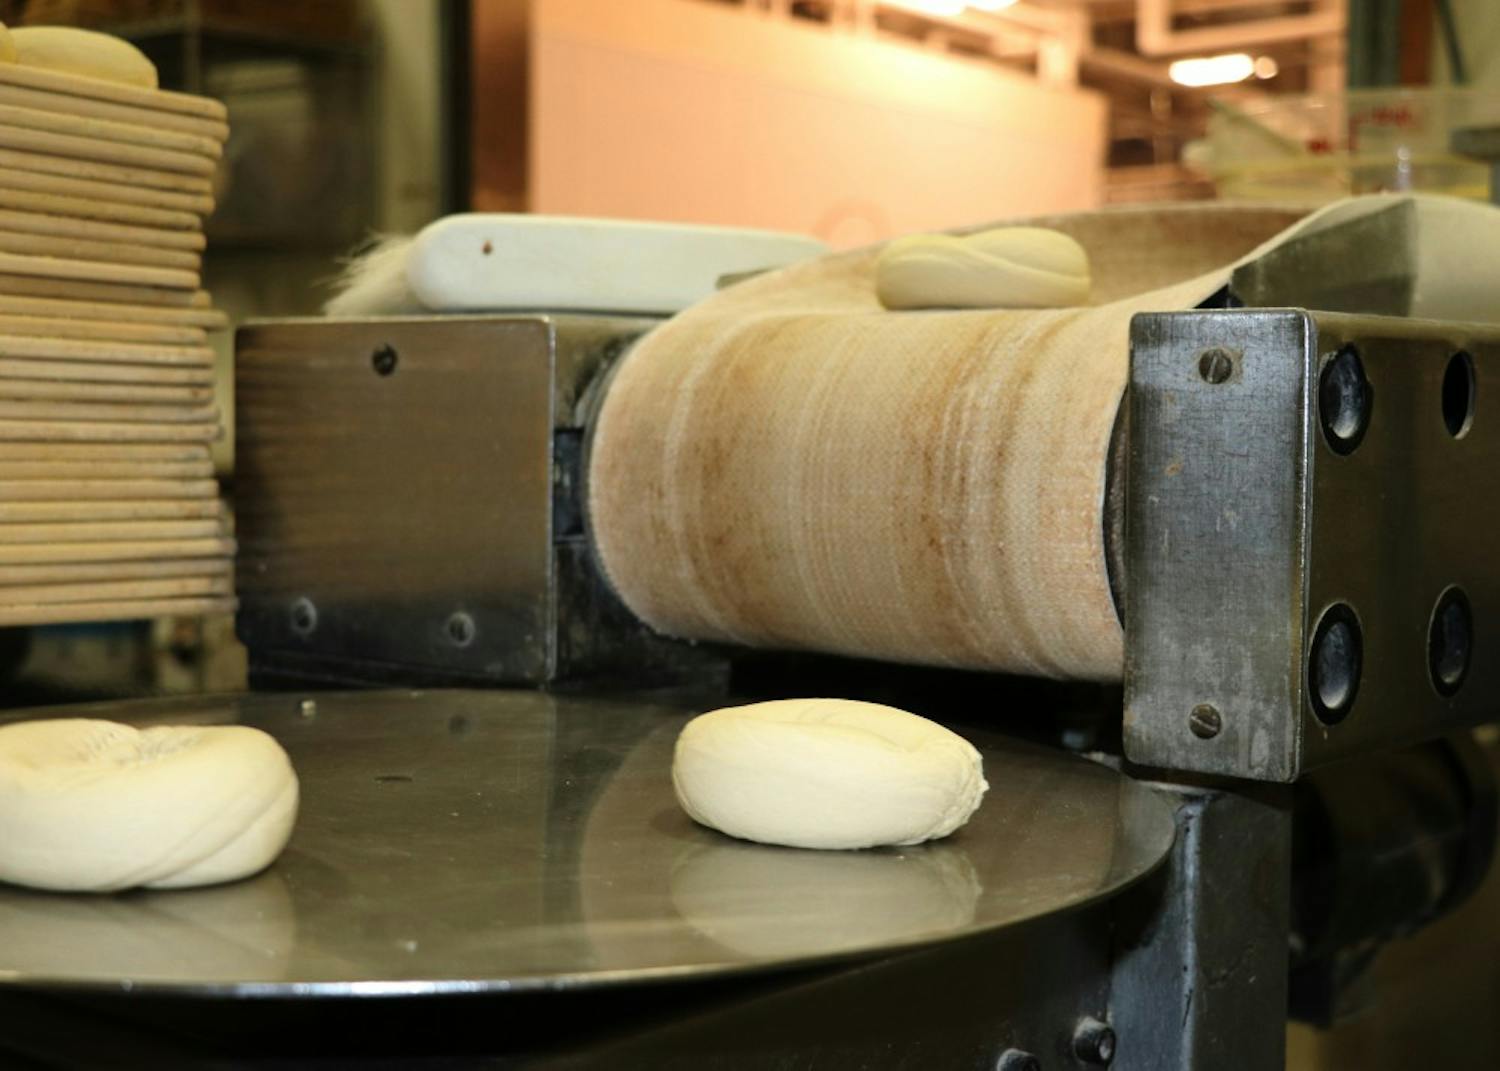 On the other end of the machine, bagels come out and land on a spinning disc before being placed on racks. Tritan said they use 500 pounds of flour a day on average.